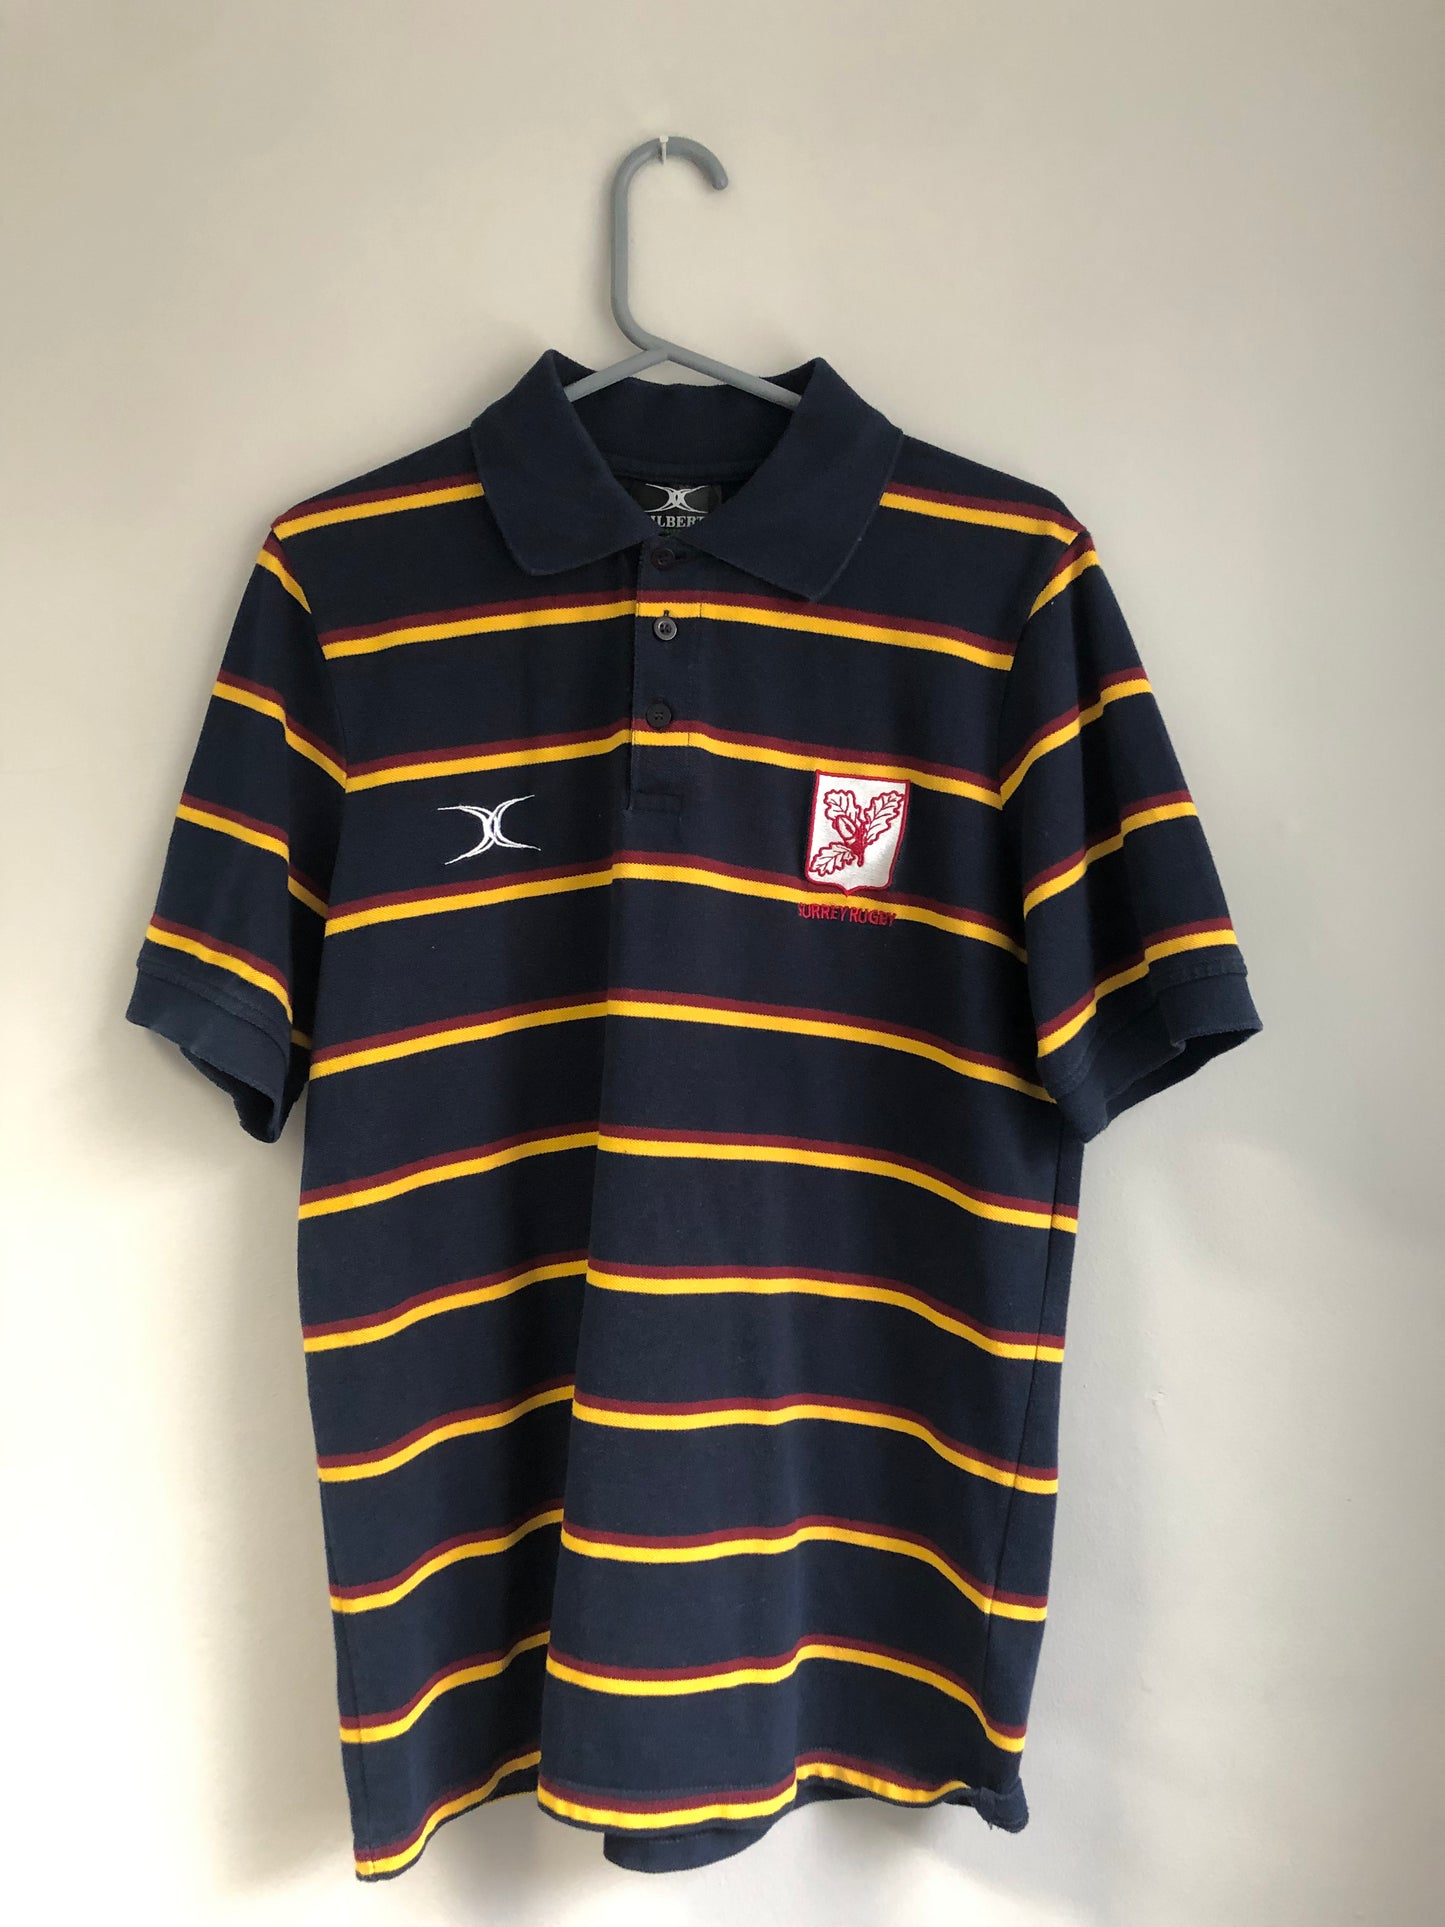 Surrey Rugby Polo Shirt - 42” Chest